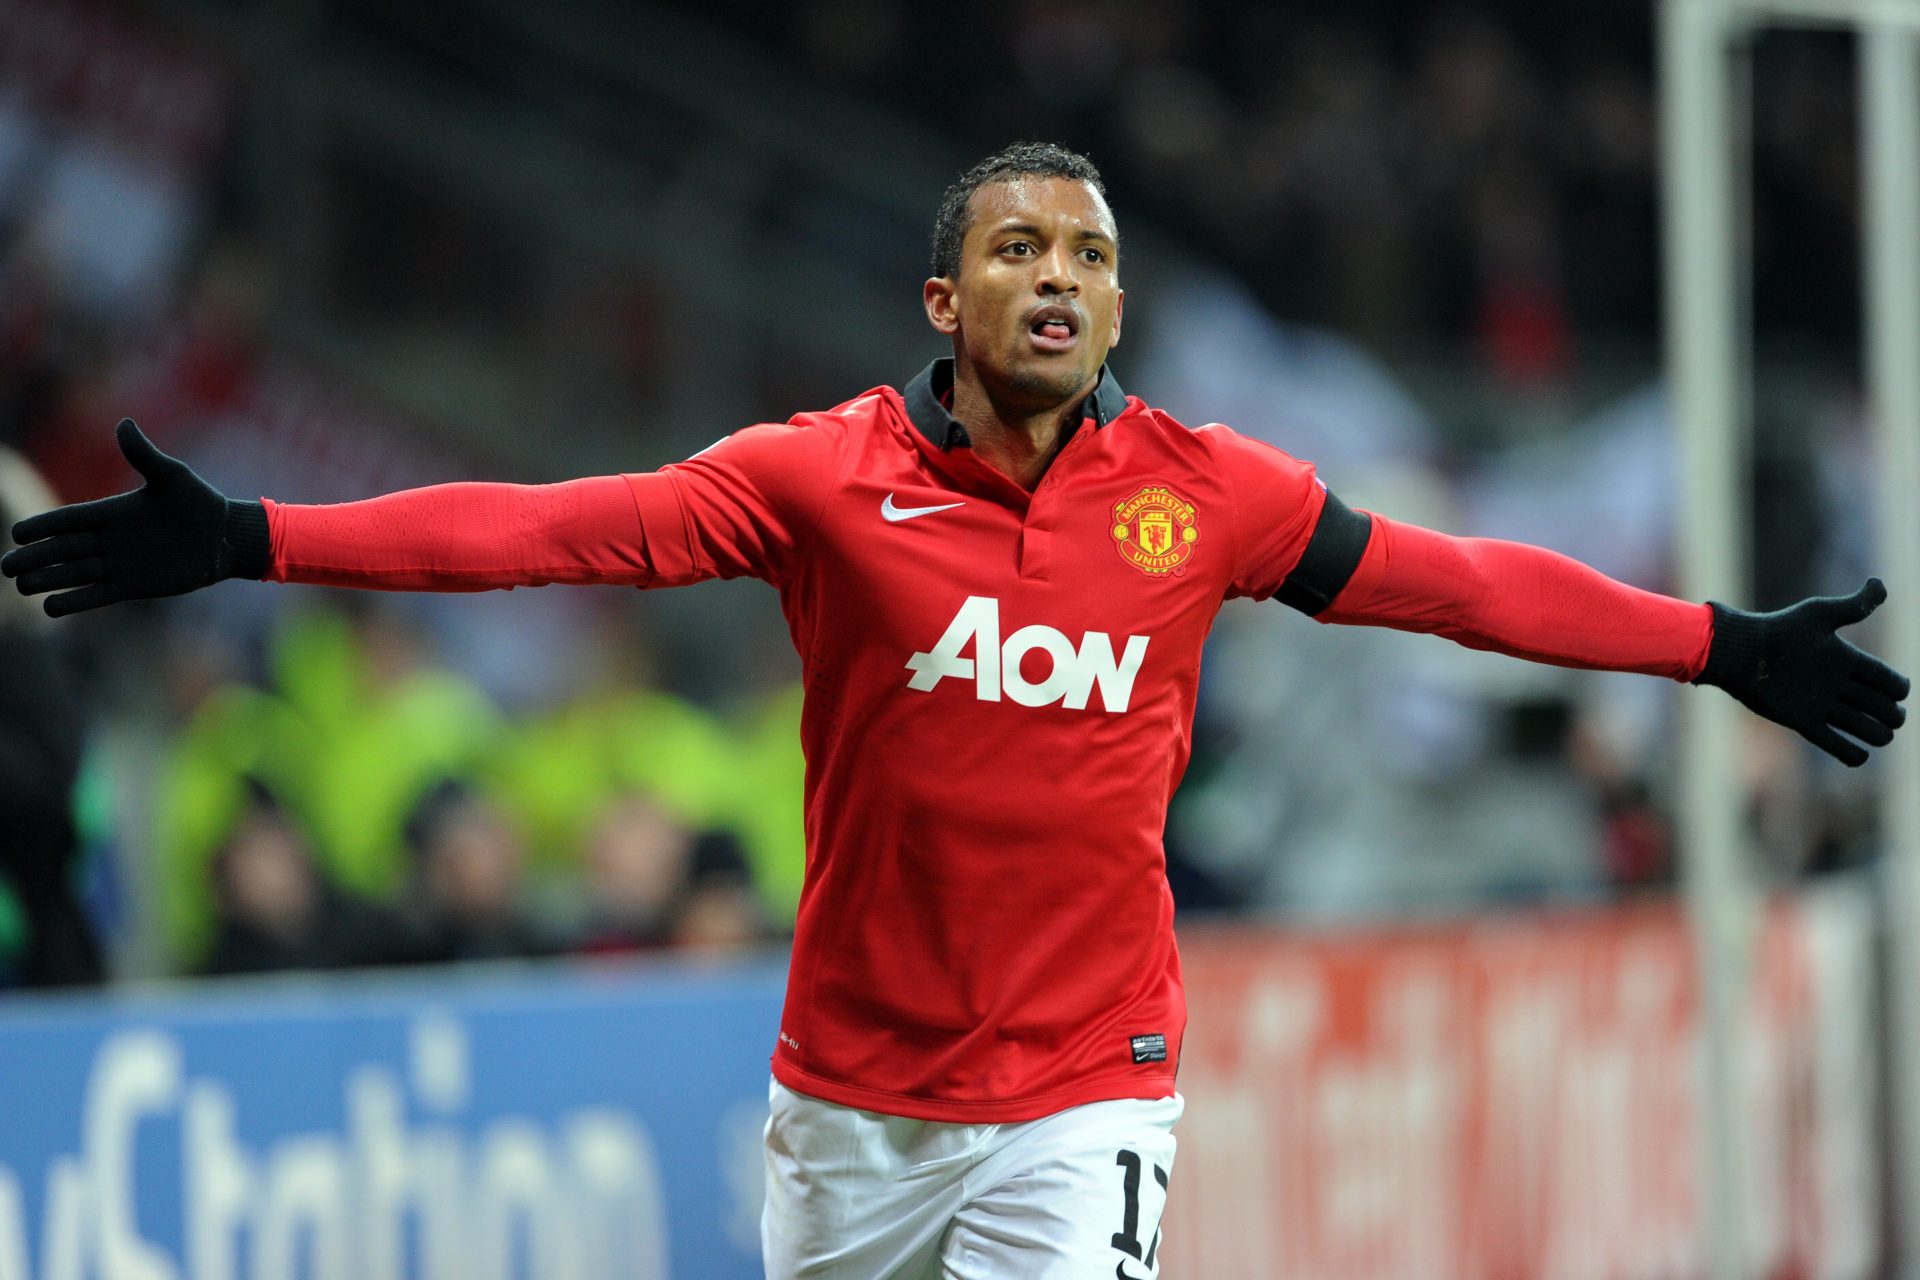 From Poverty to the Premier League: The incredible story of Nani